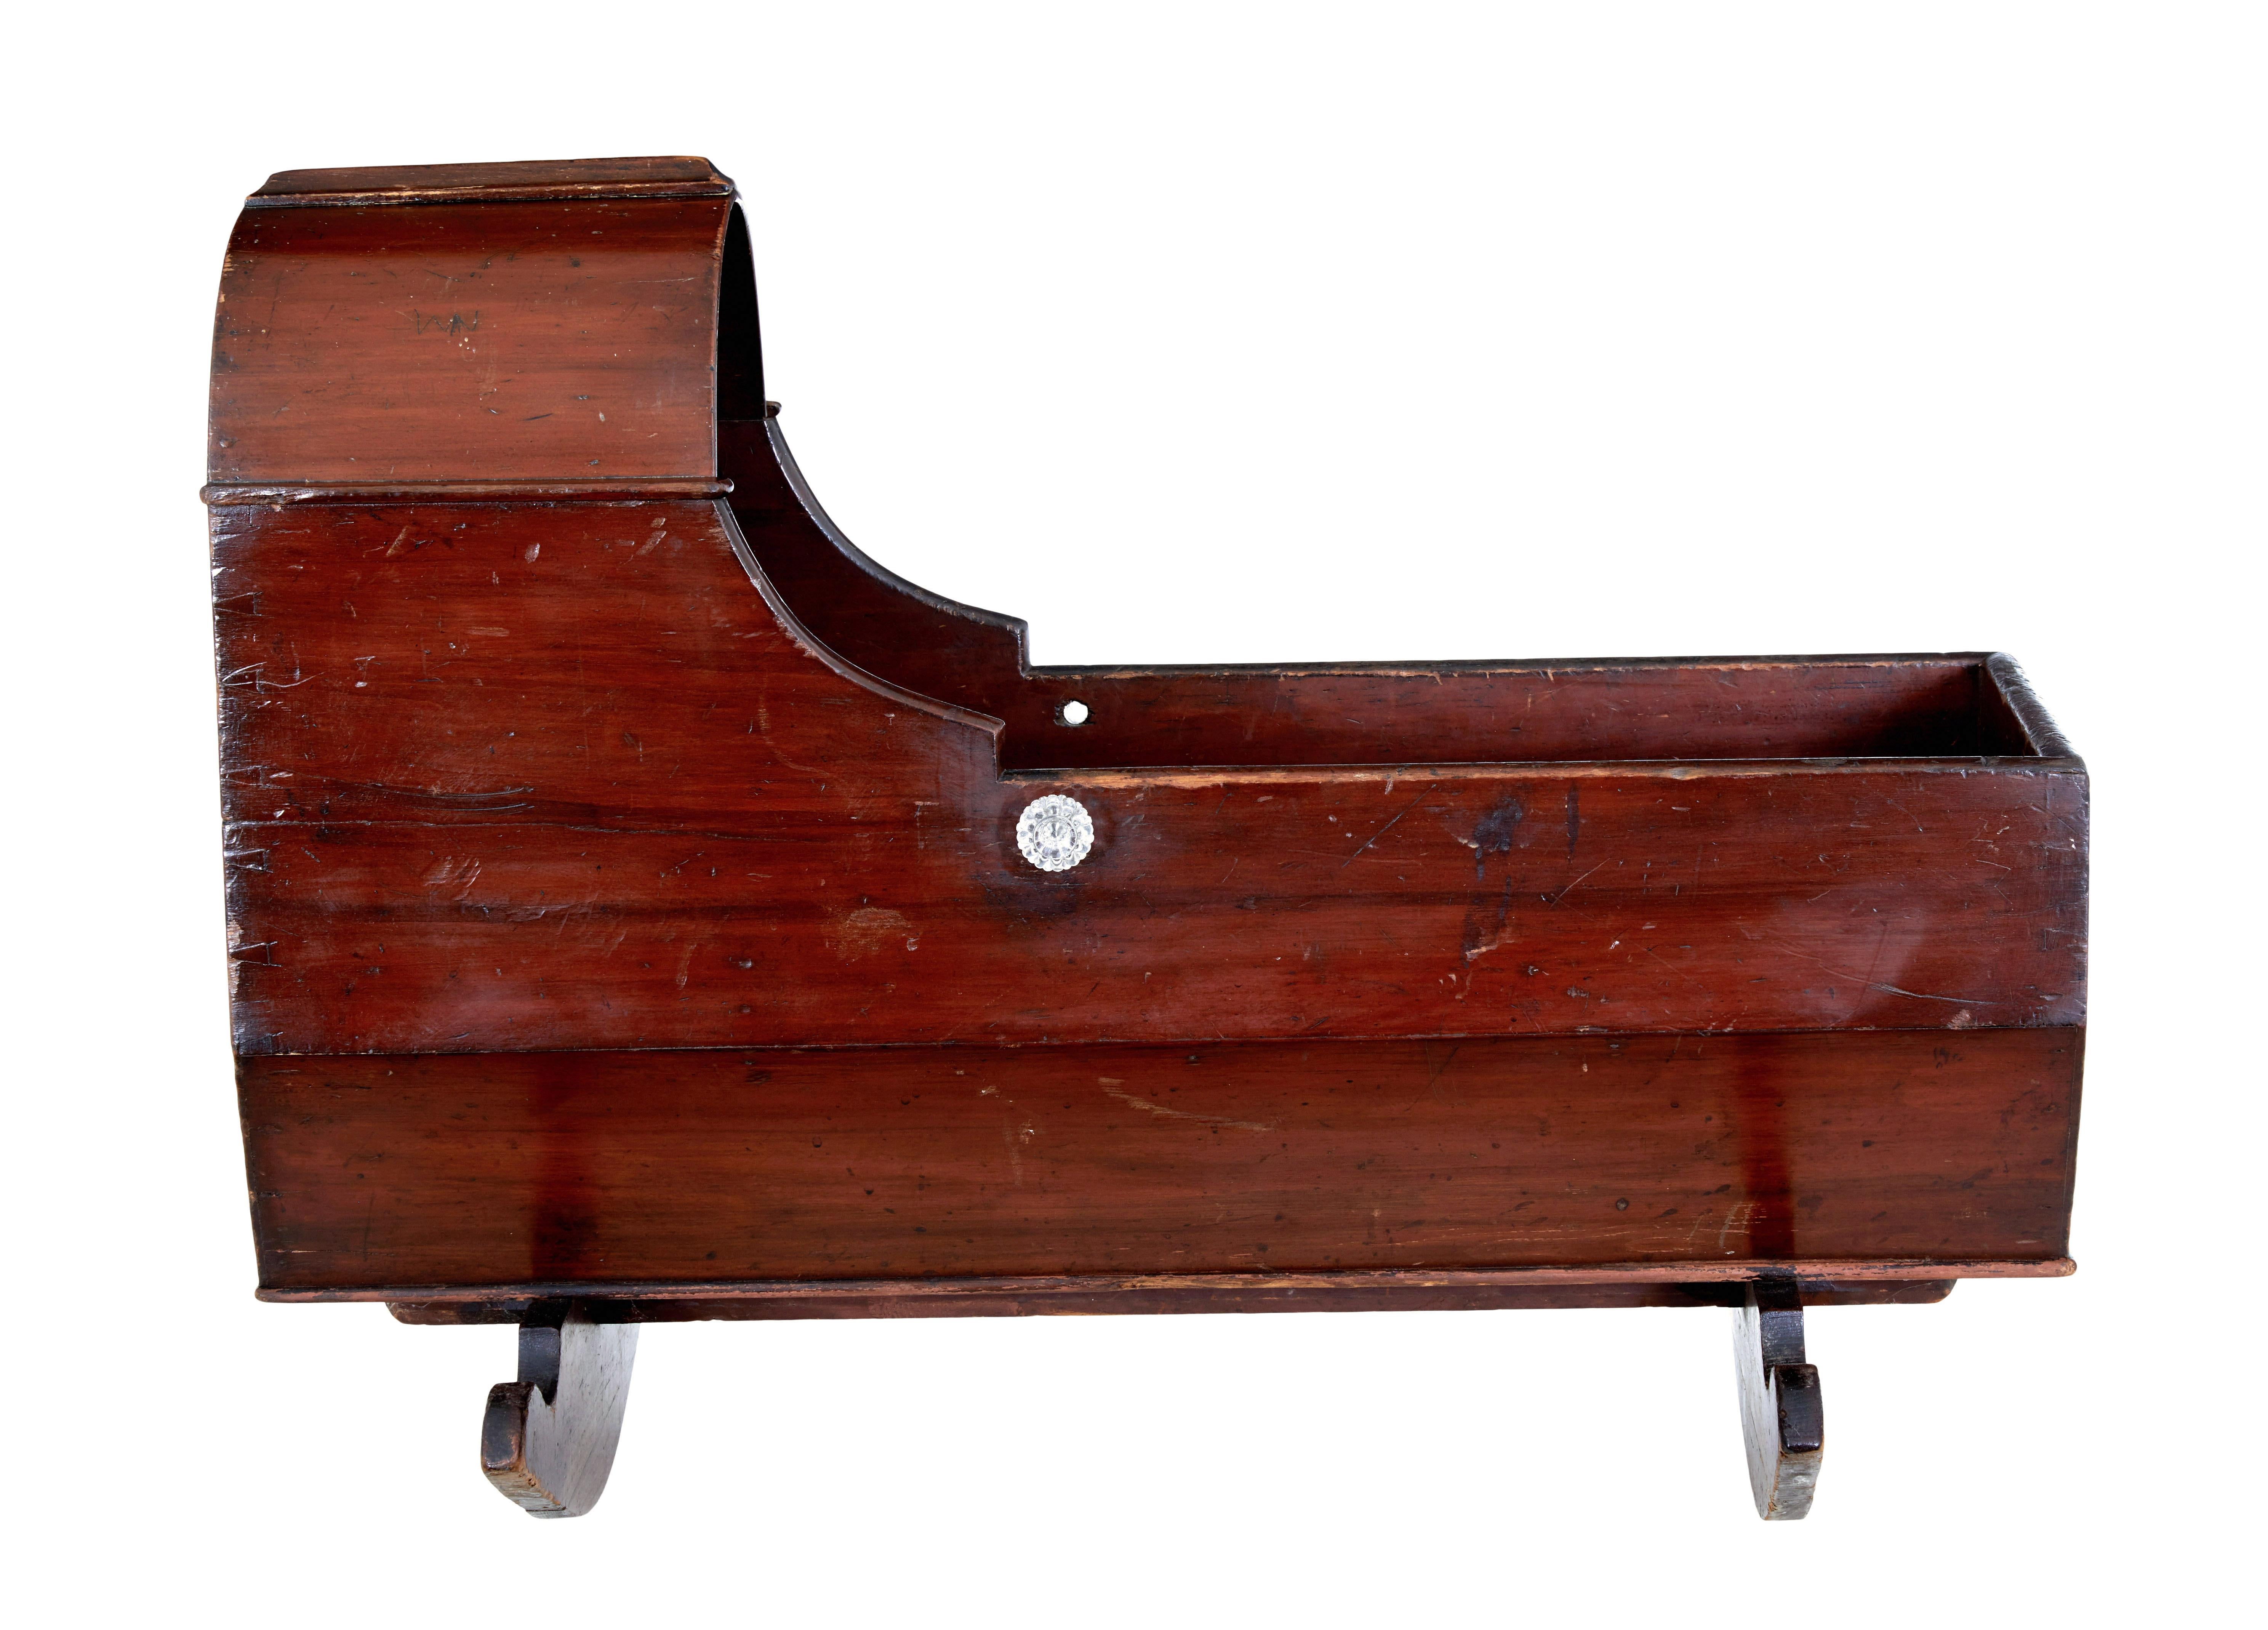 Victorian painted pine canopy top cradle circa 1870.

Good example of how we used to put our children to sleep in the 19th century.

Pine construction with original red wash stain.  Bed space with canopy, placed on 2 sledge rockers.  Decorated with